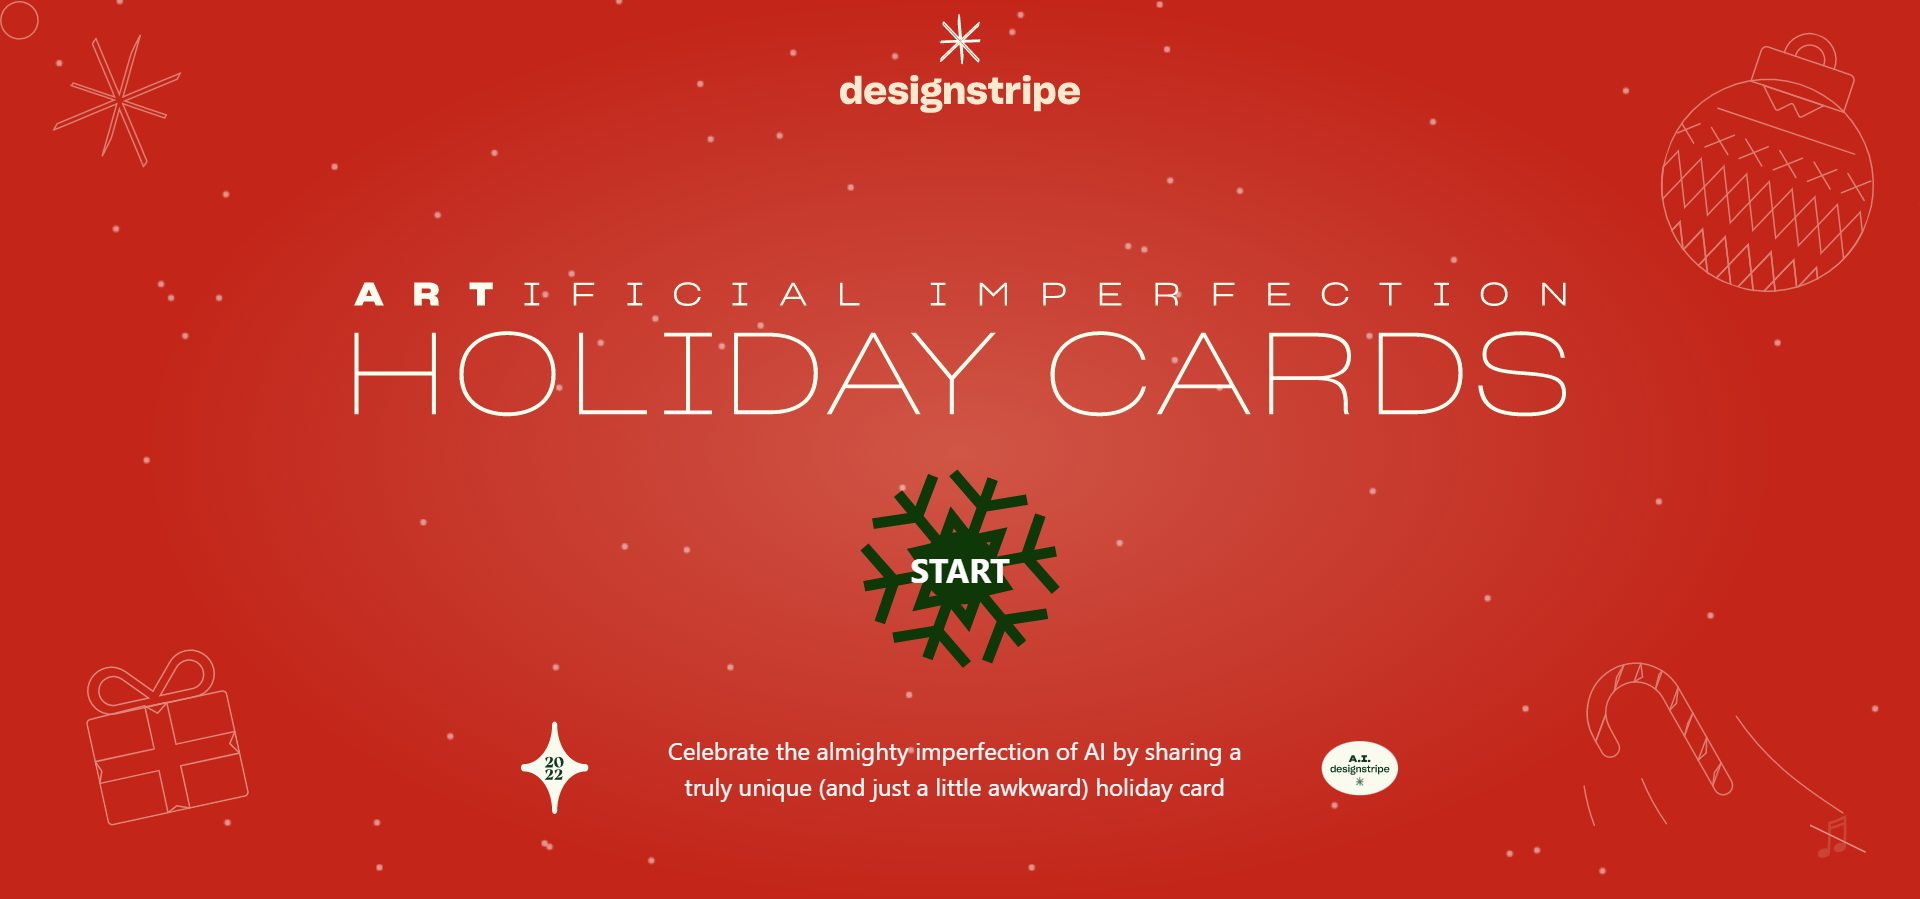 Transform Your Marketing Game with Designstripe.com – The Ultimate Destination for Customizable Design Templates!